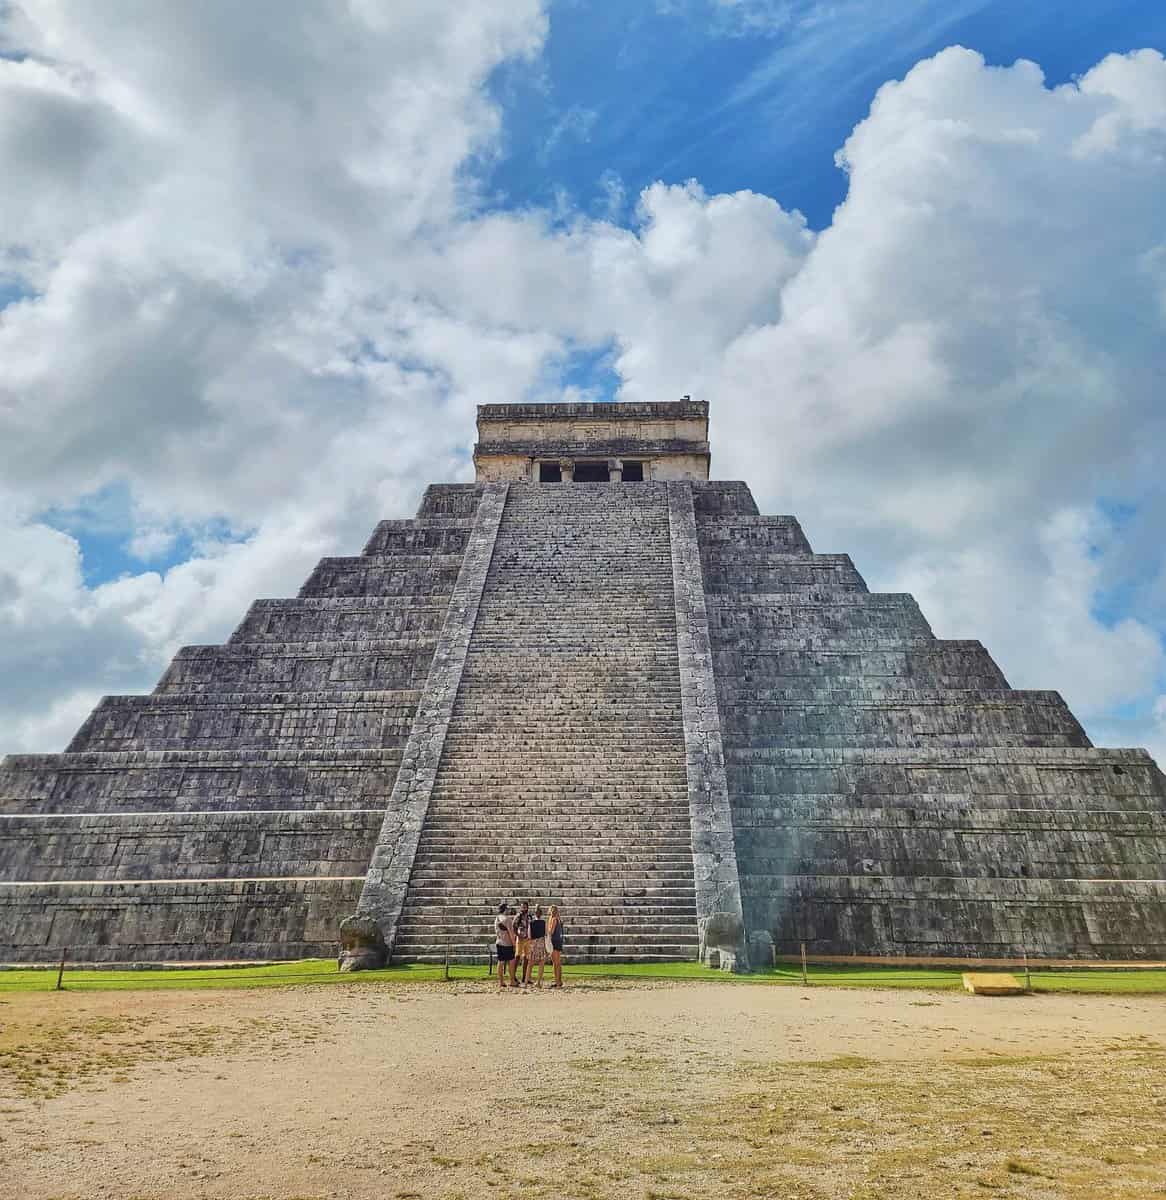 Visitors standing in front of the iconic El Castillo pyramid at Chichen Itza under a cloudy blue sky in Yucatan, Mexico.